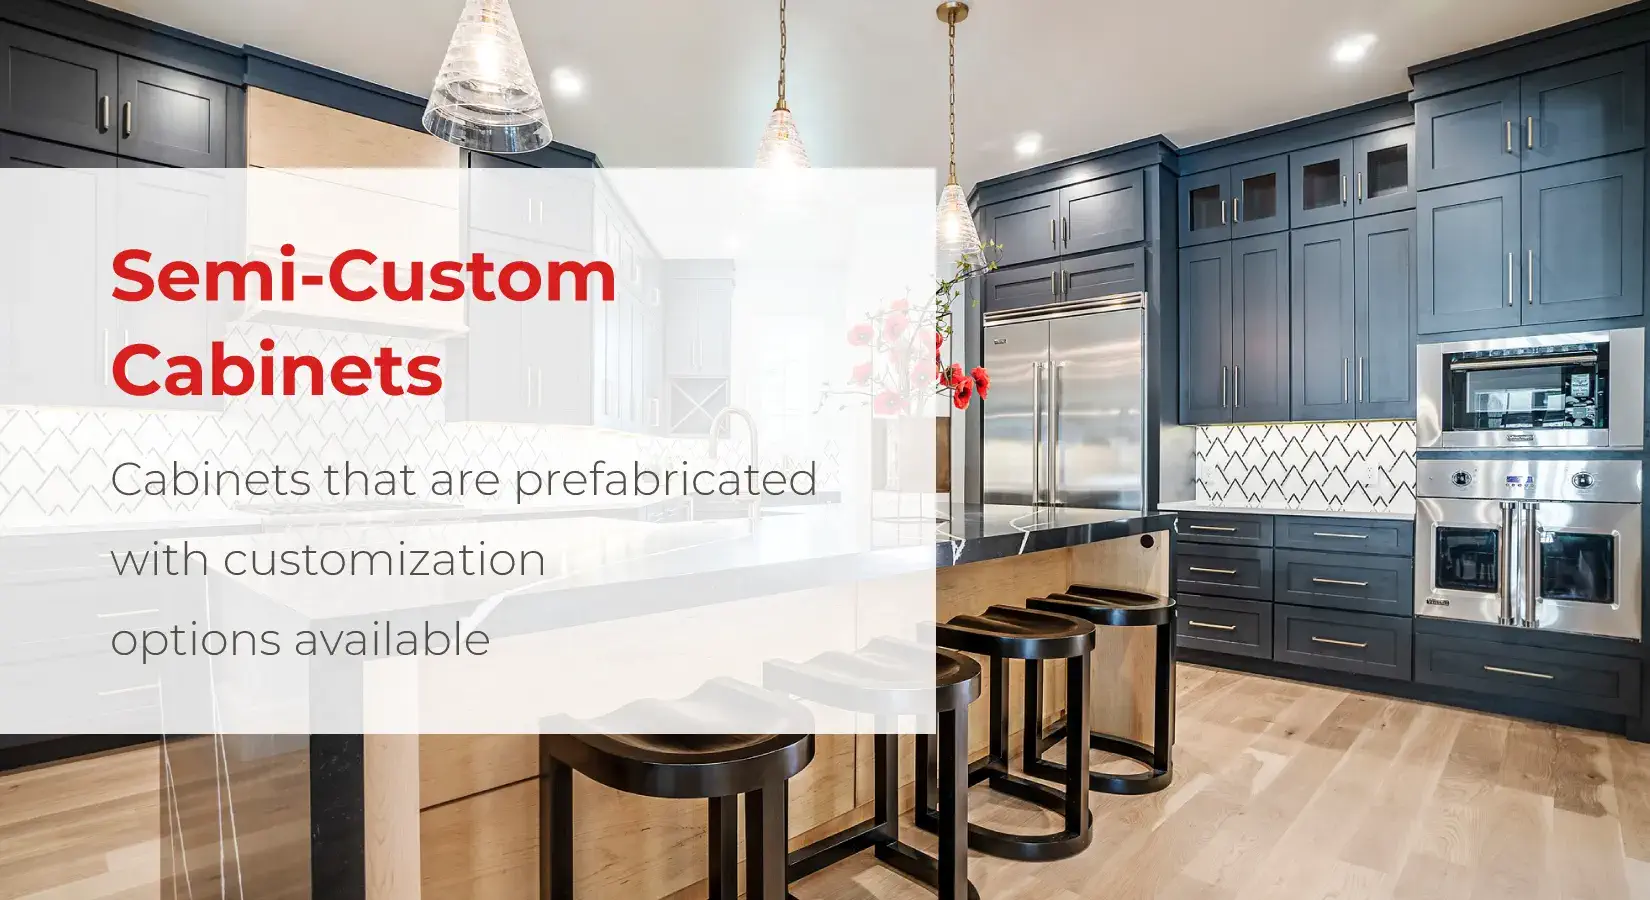 Semi-custom cabinets are cabinets that are prefabricated with customization options available.